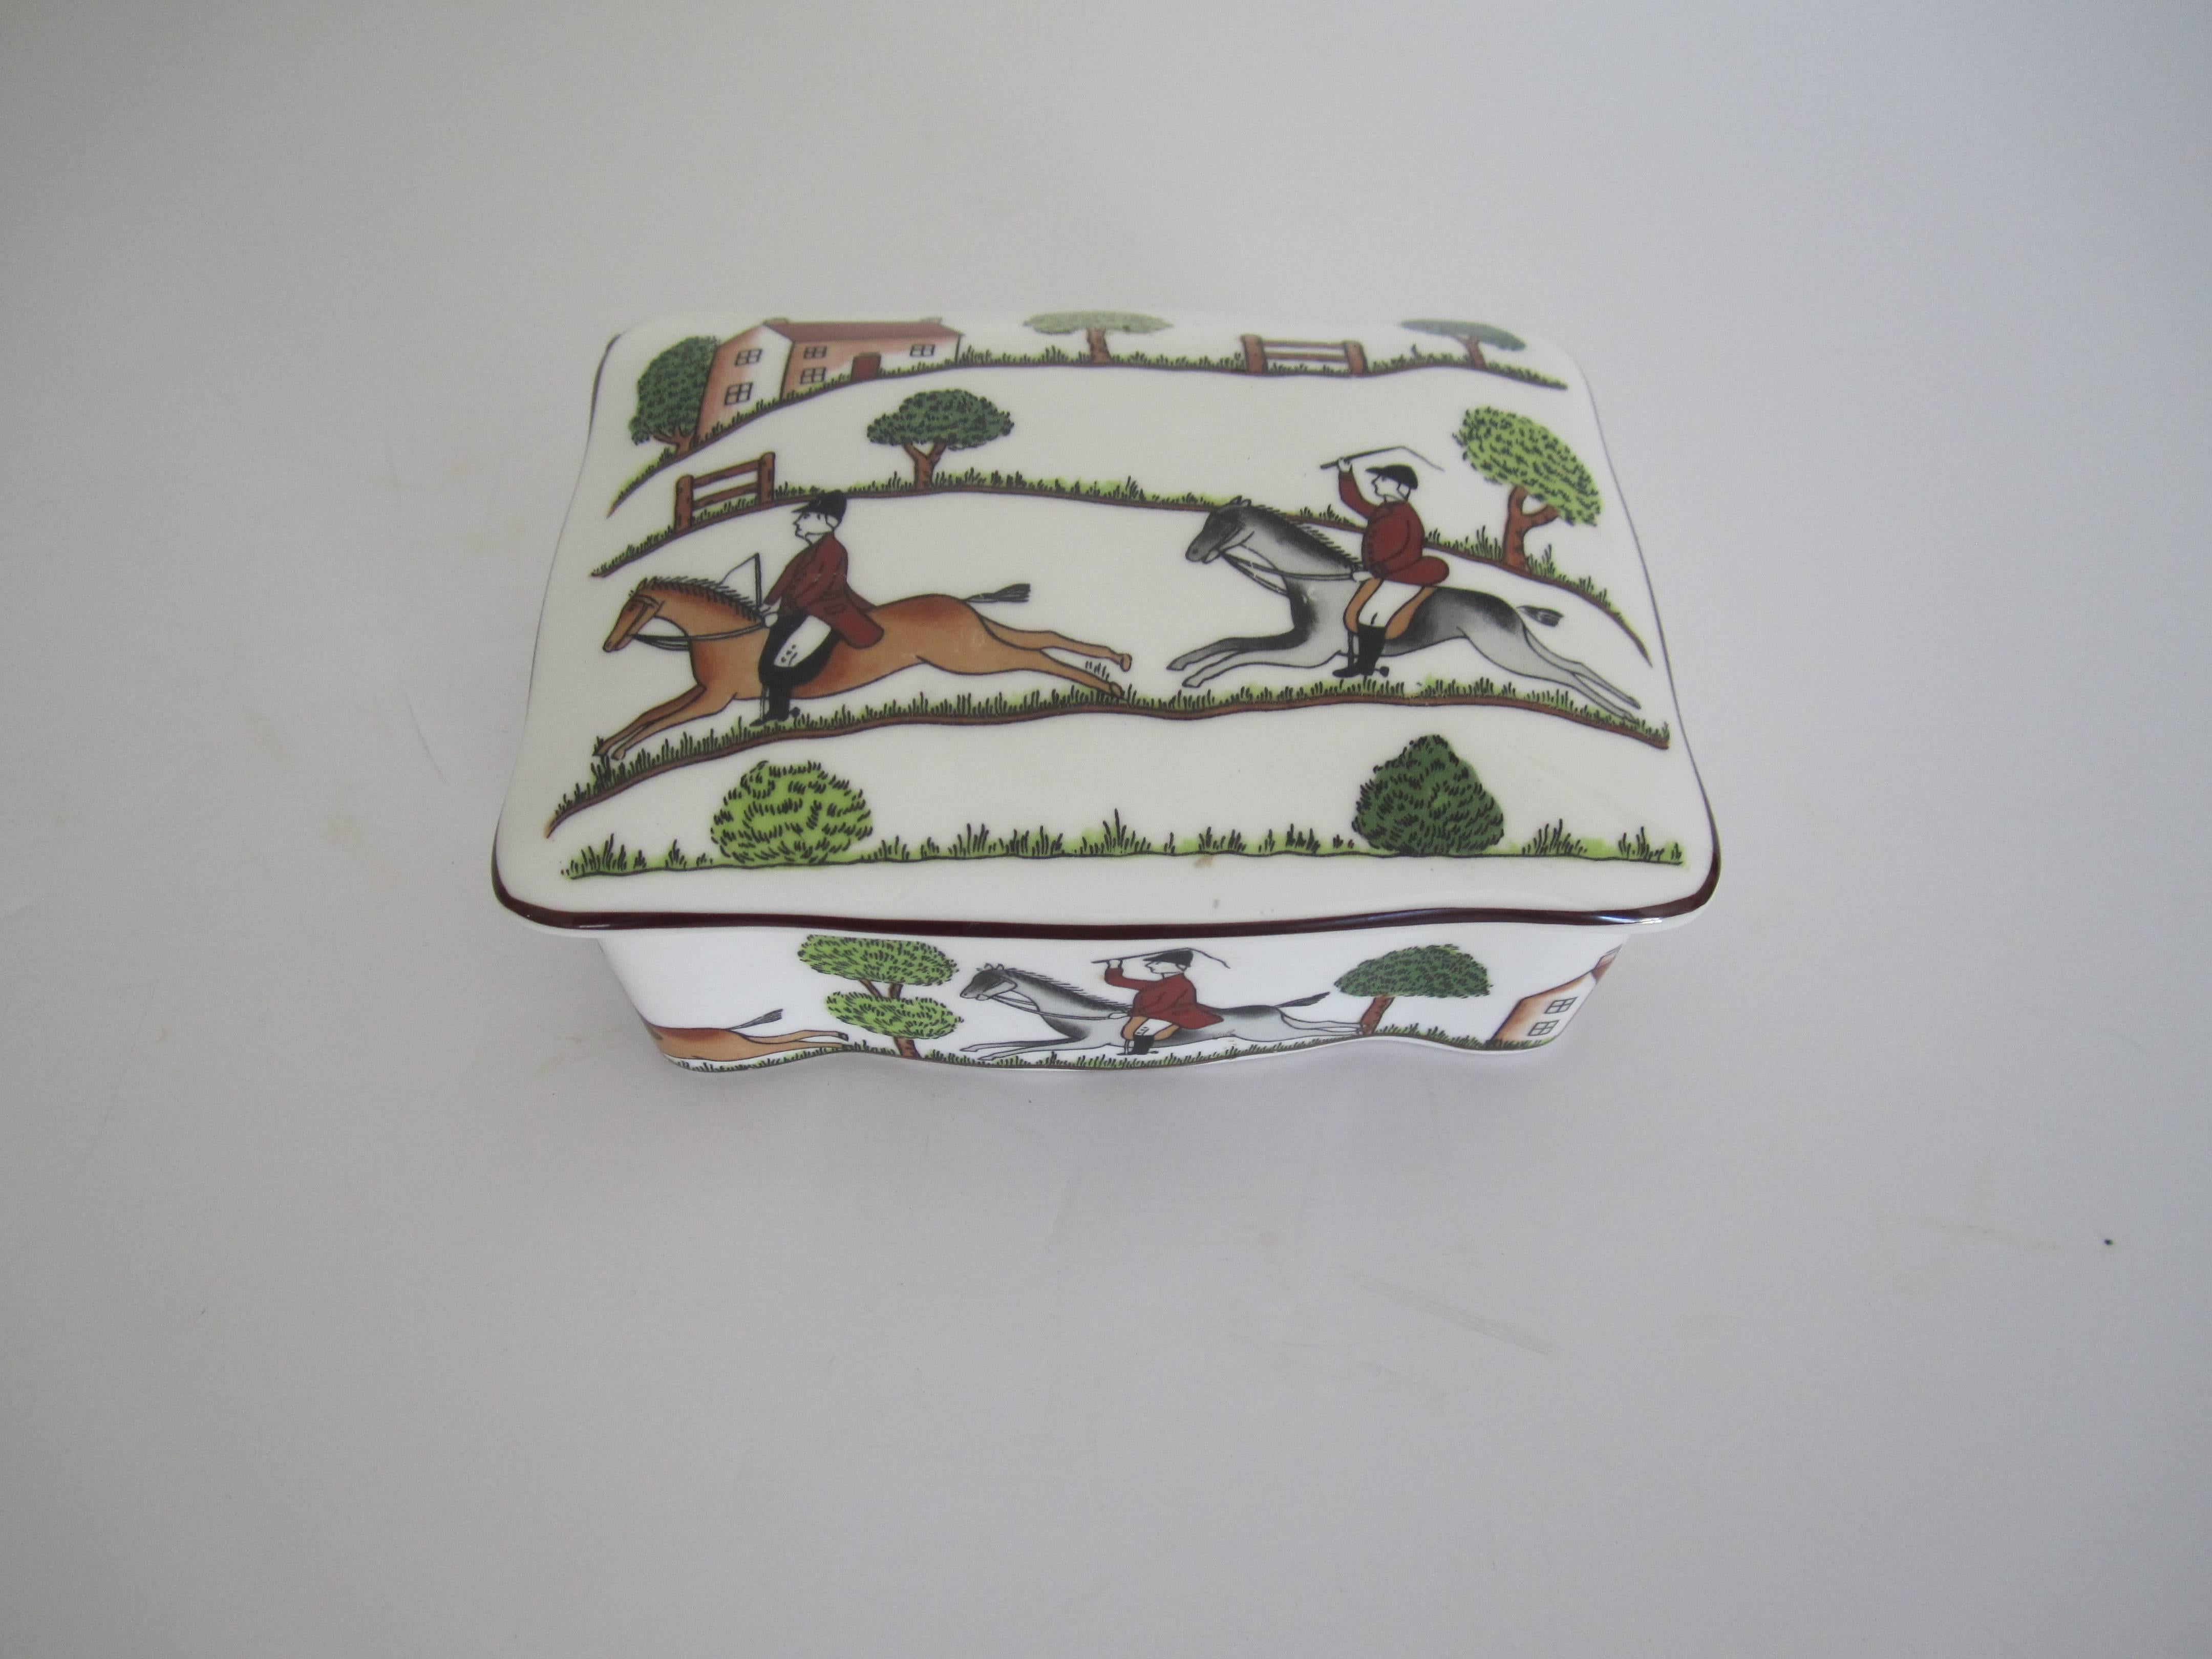 An beautiful equestrian horse 'hunting scene' porcelain decorative, jewelry, or trinket box called 'the chase', in the style of Hermès. Box is from England, with marker's mark as show in image #6. Hues include emerald green, light green, browns,